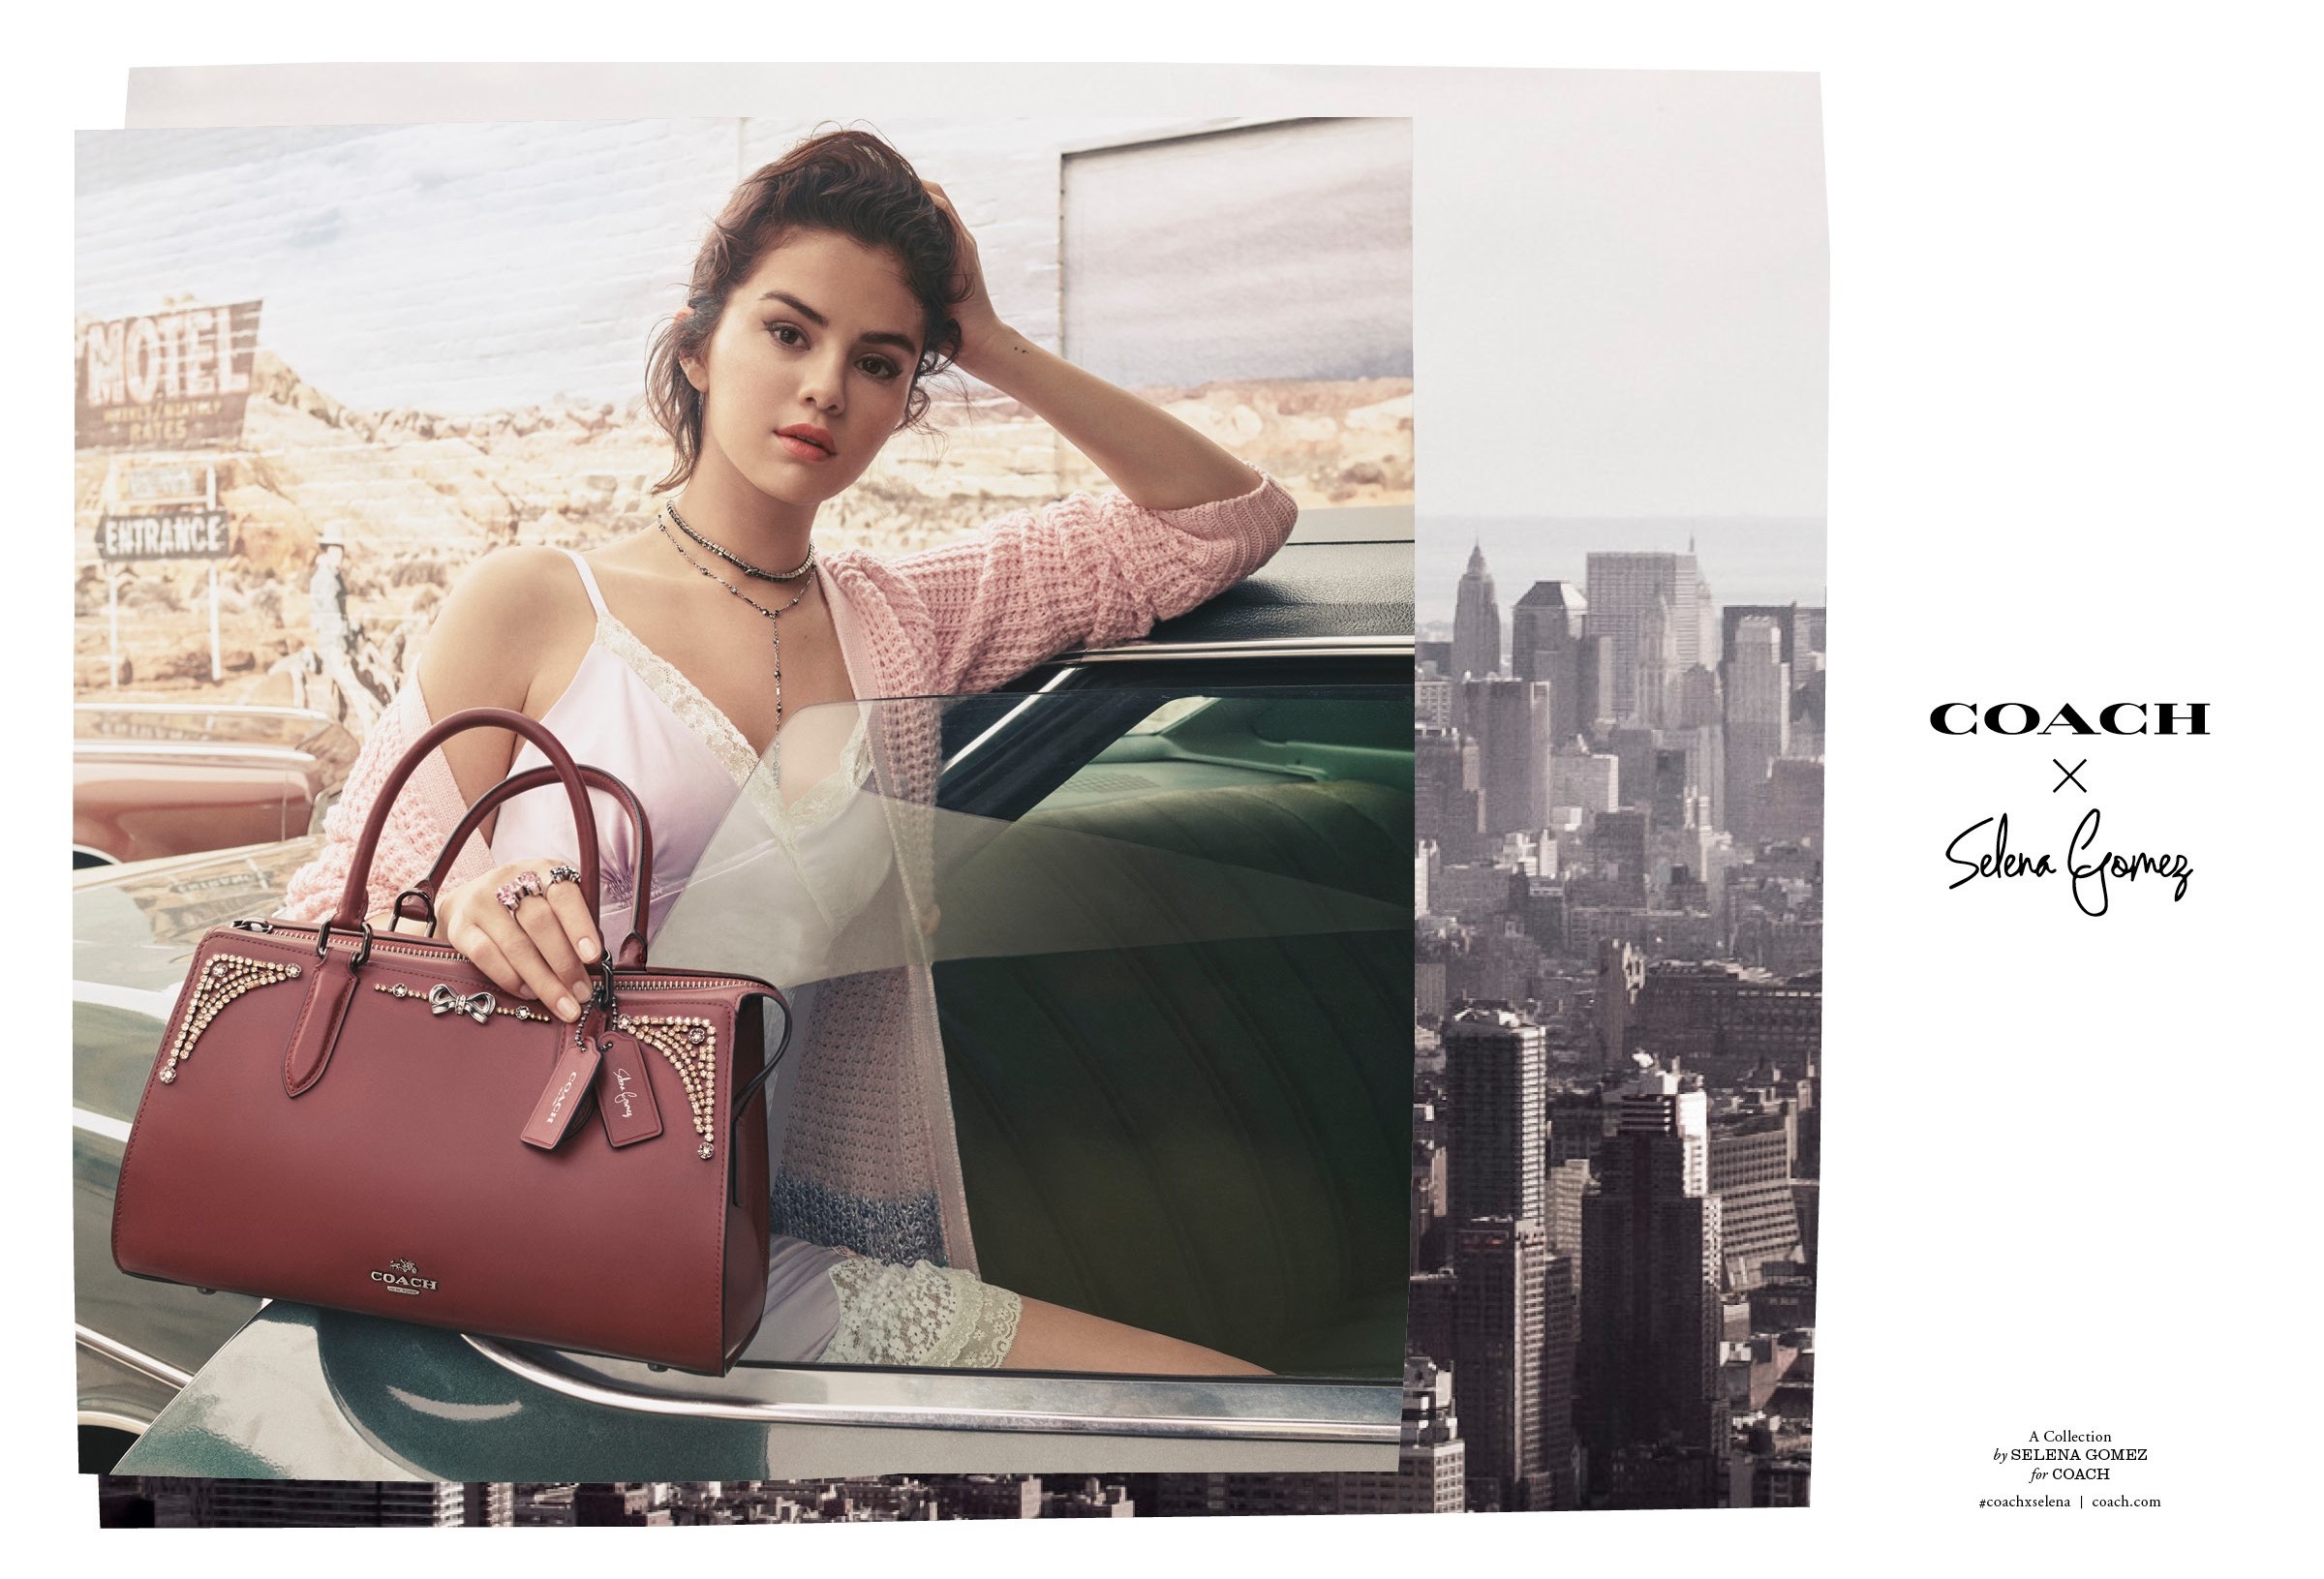 Selena Gomez's Coach Collection Is Here, and Comes With Some